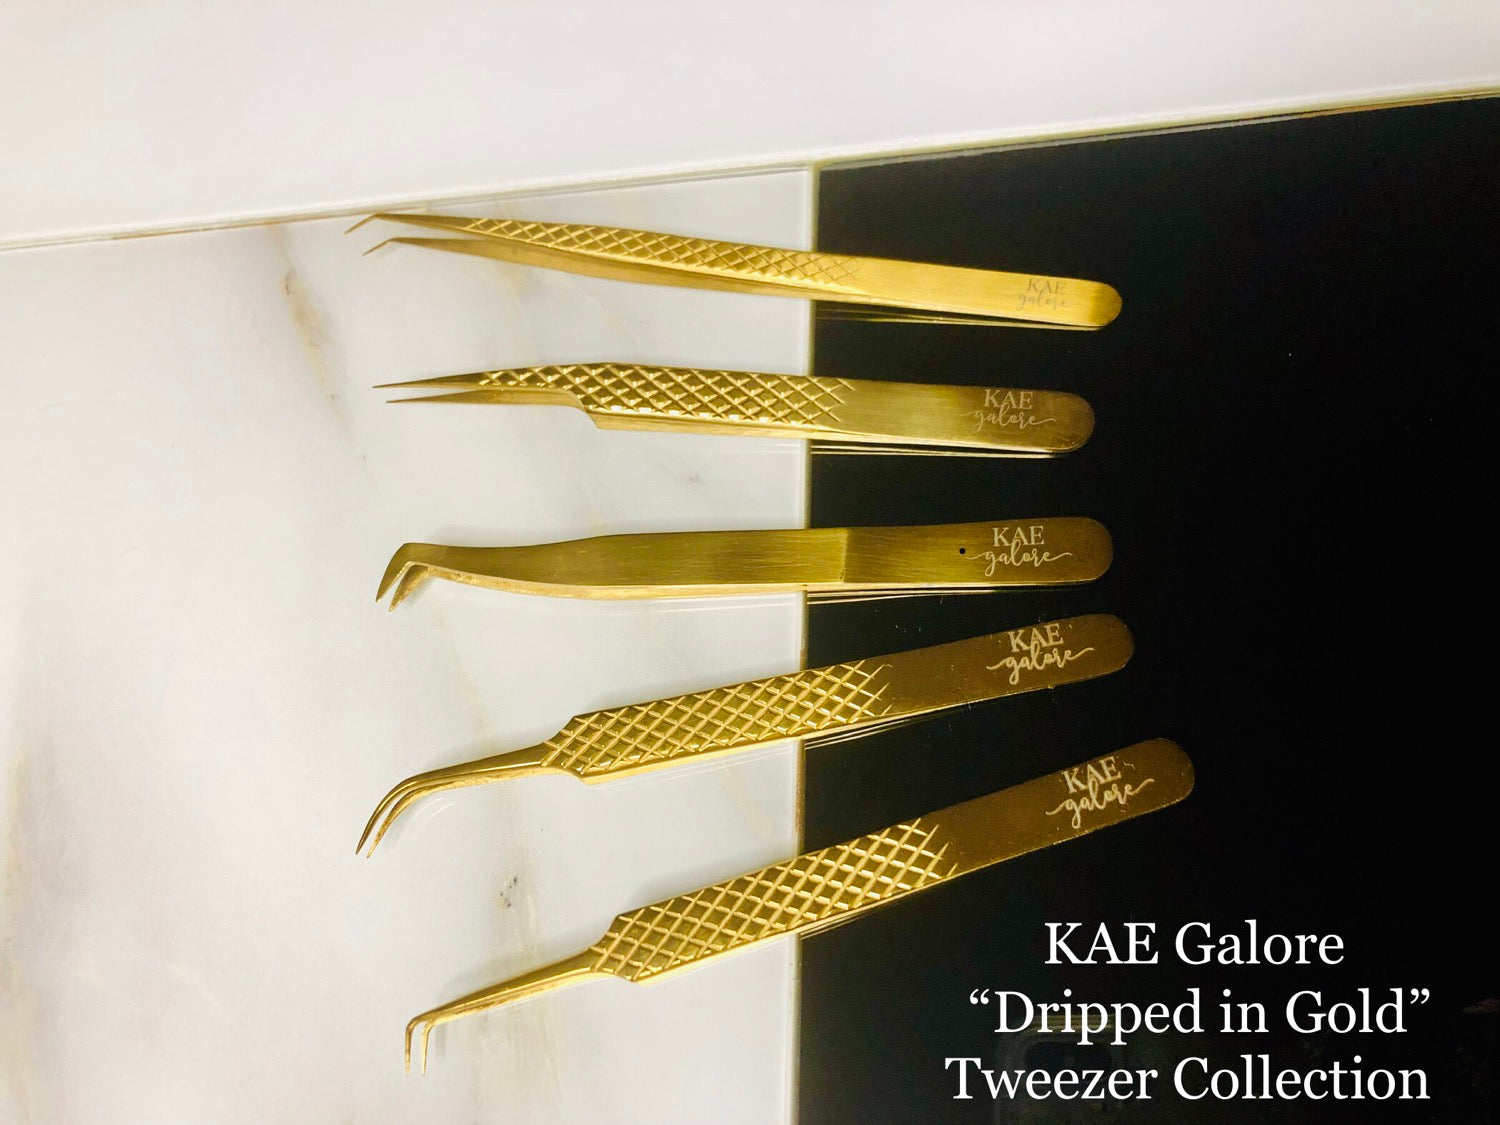 KAE Galore "Dripped In Gold"